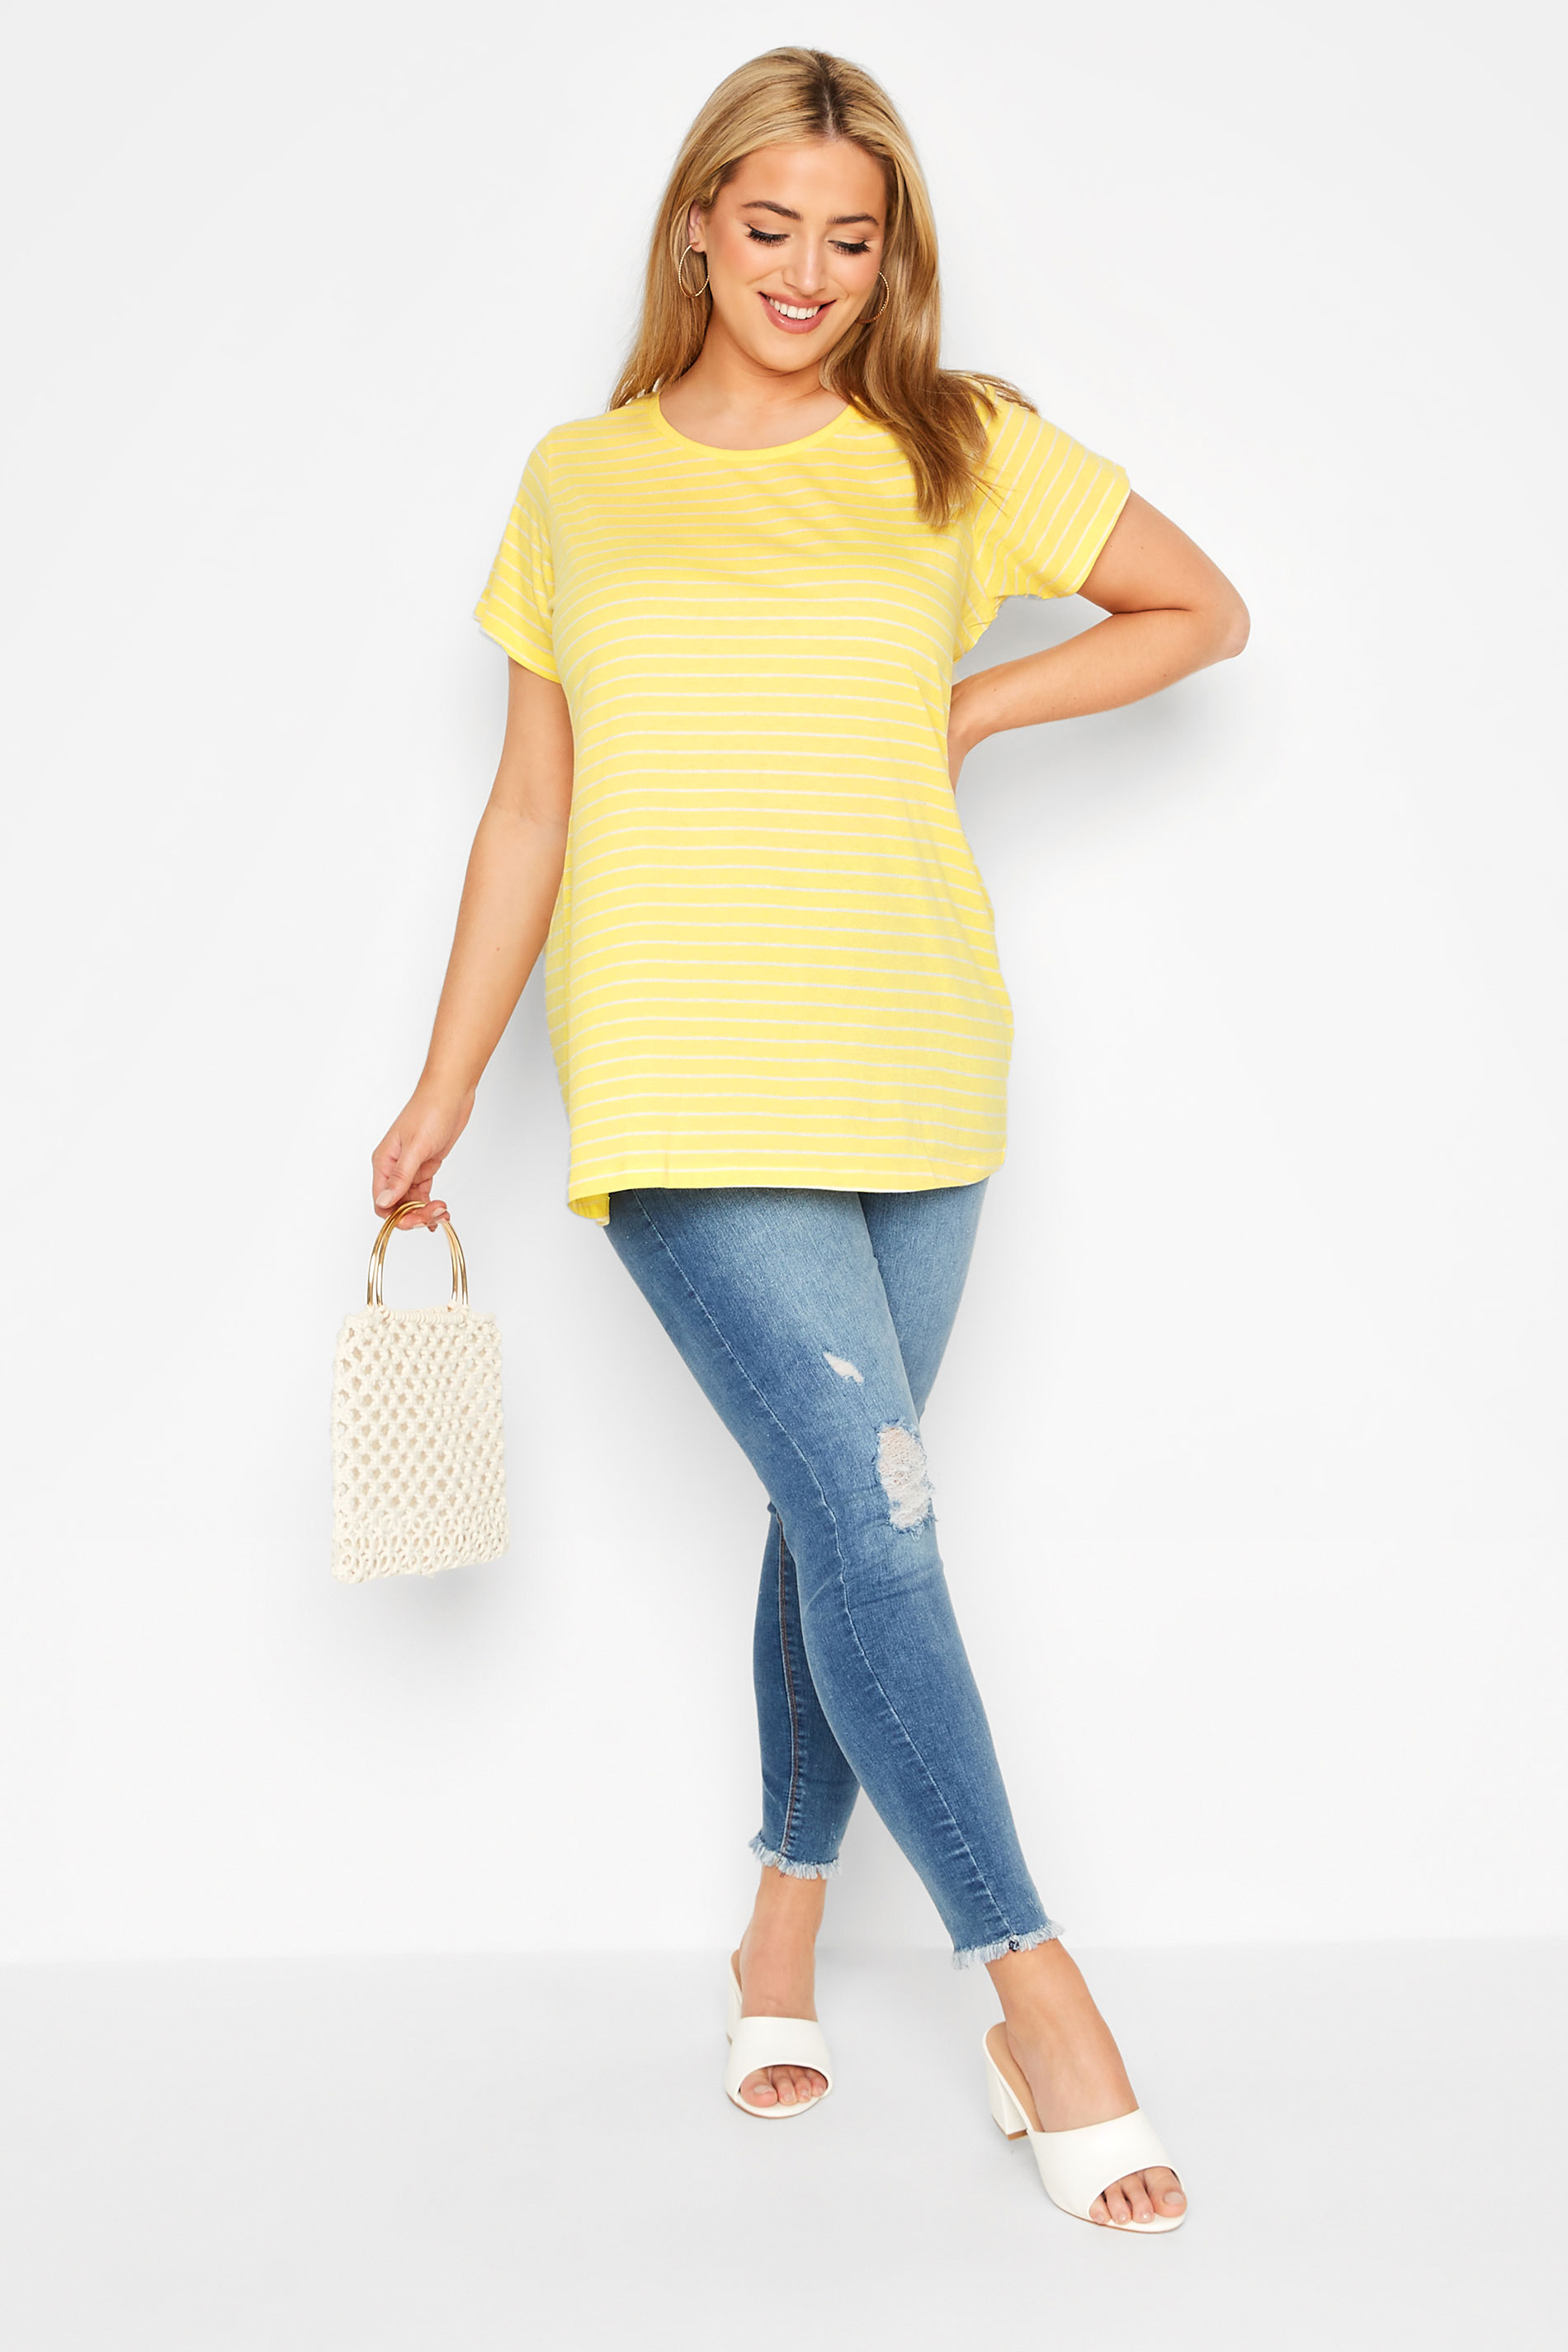 Grande taille  Tops Grande taille  T-Shirts | T-Shirt Jaune Fines Rayures - NG78341